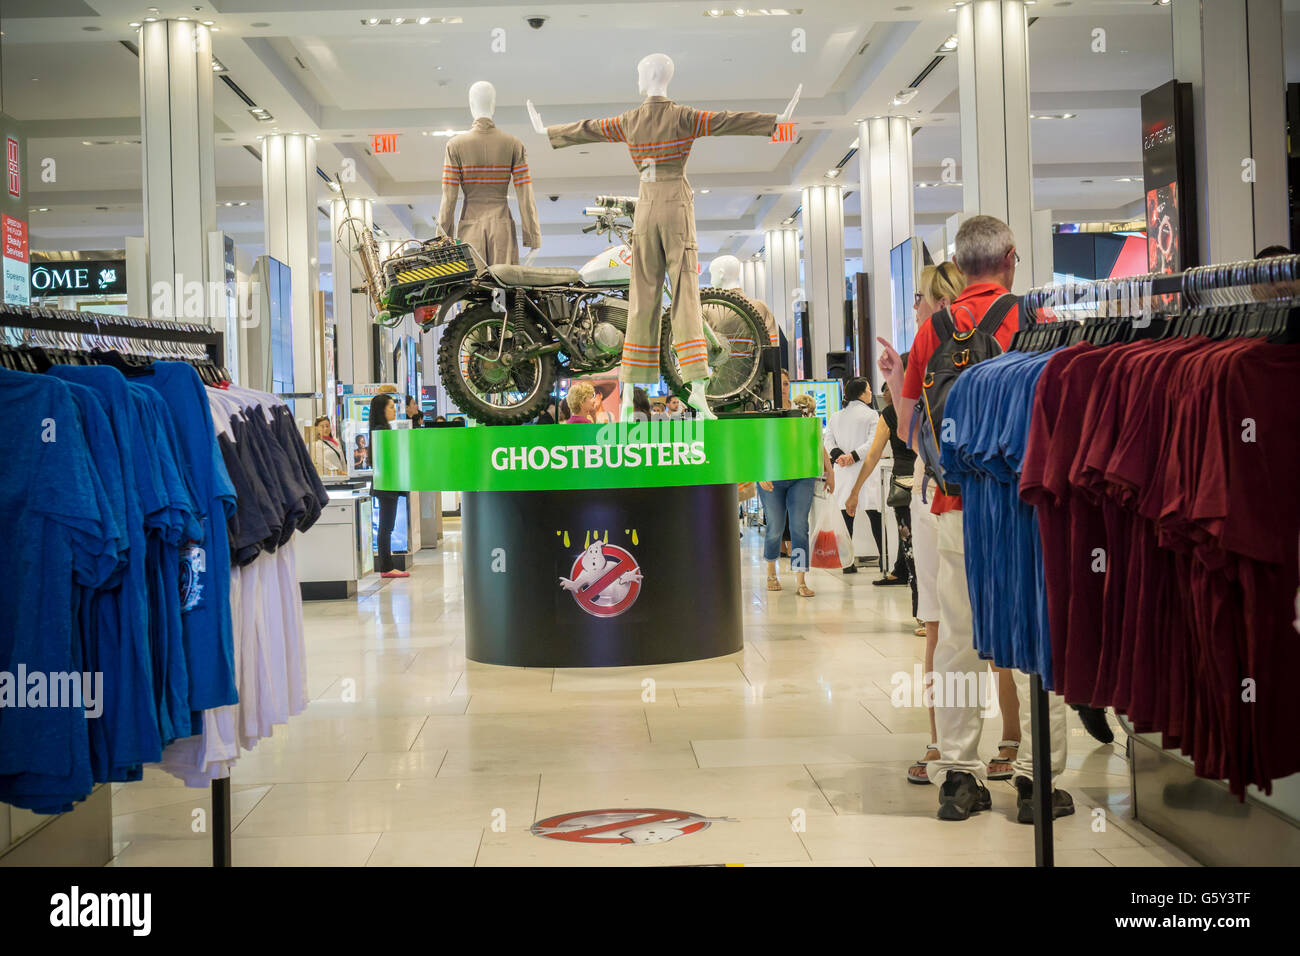 Movie Merchandising High Resolution Stock Photography and Images - Alamy